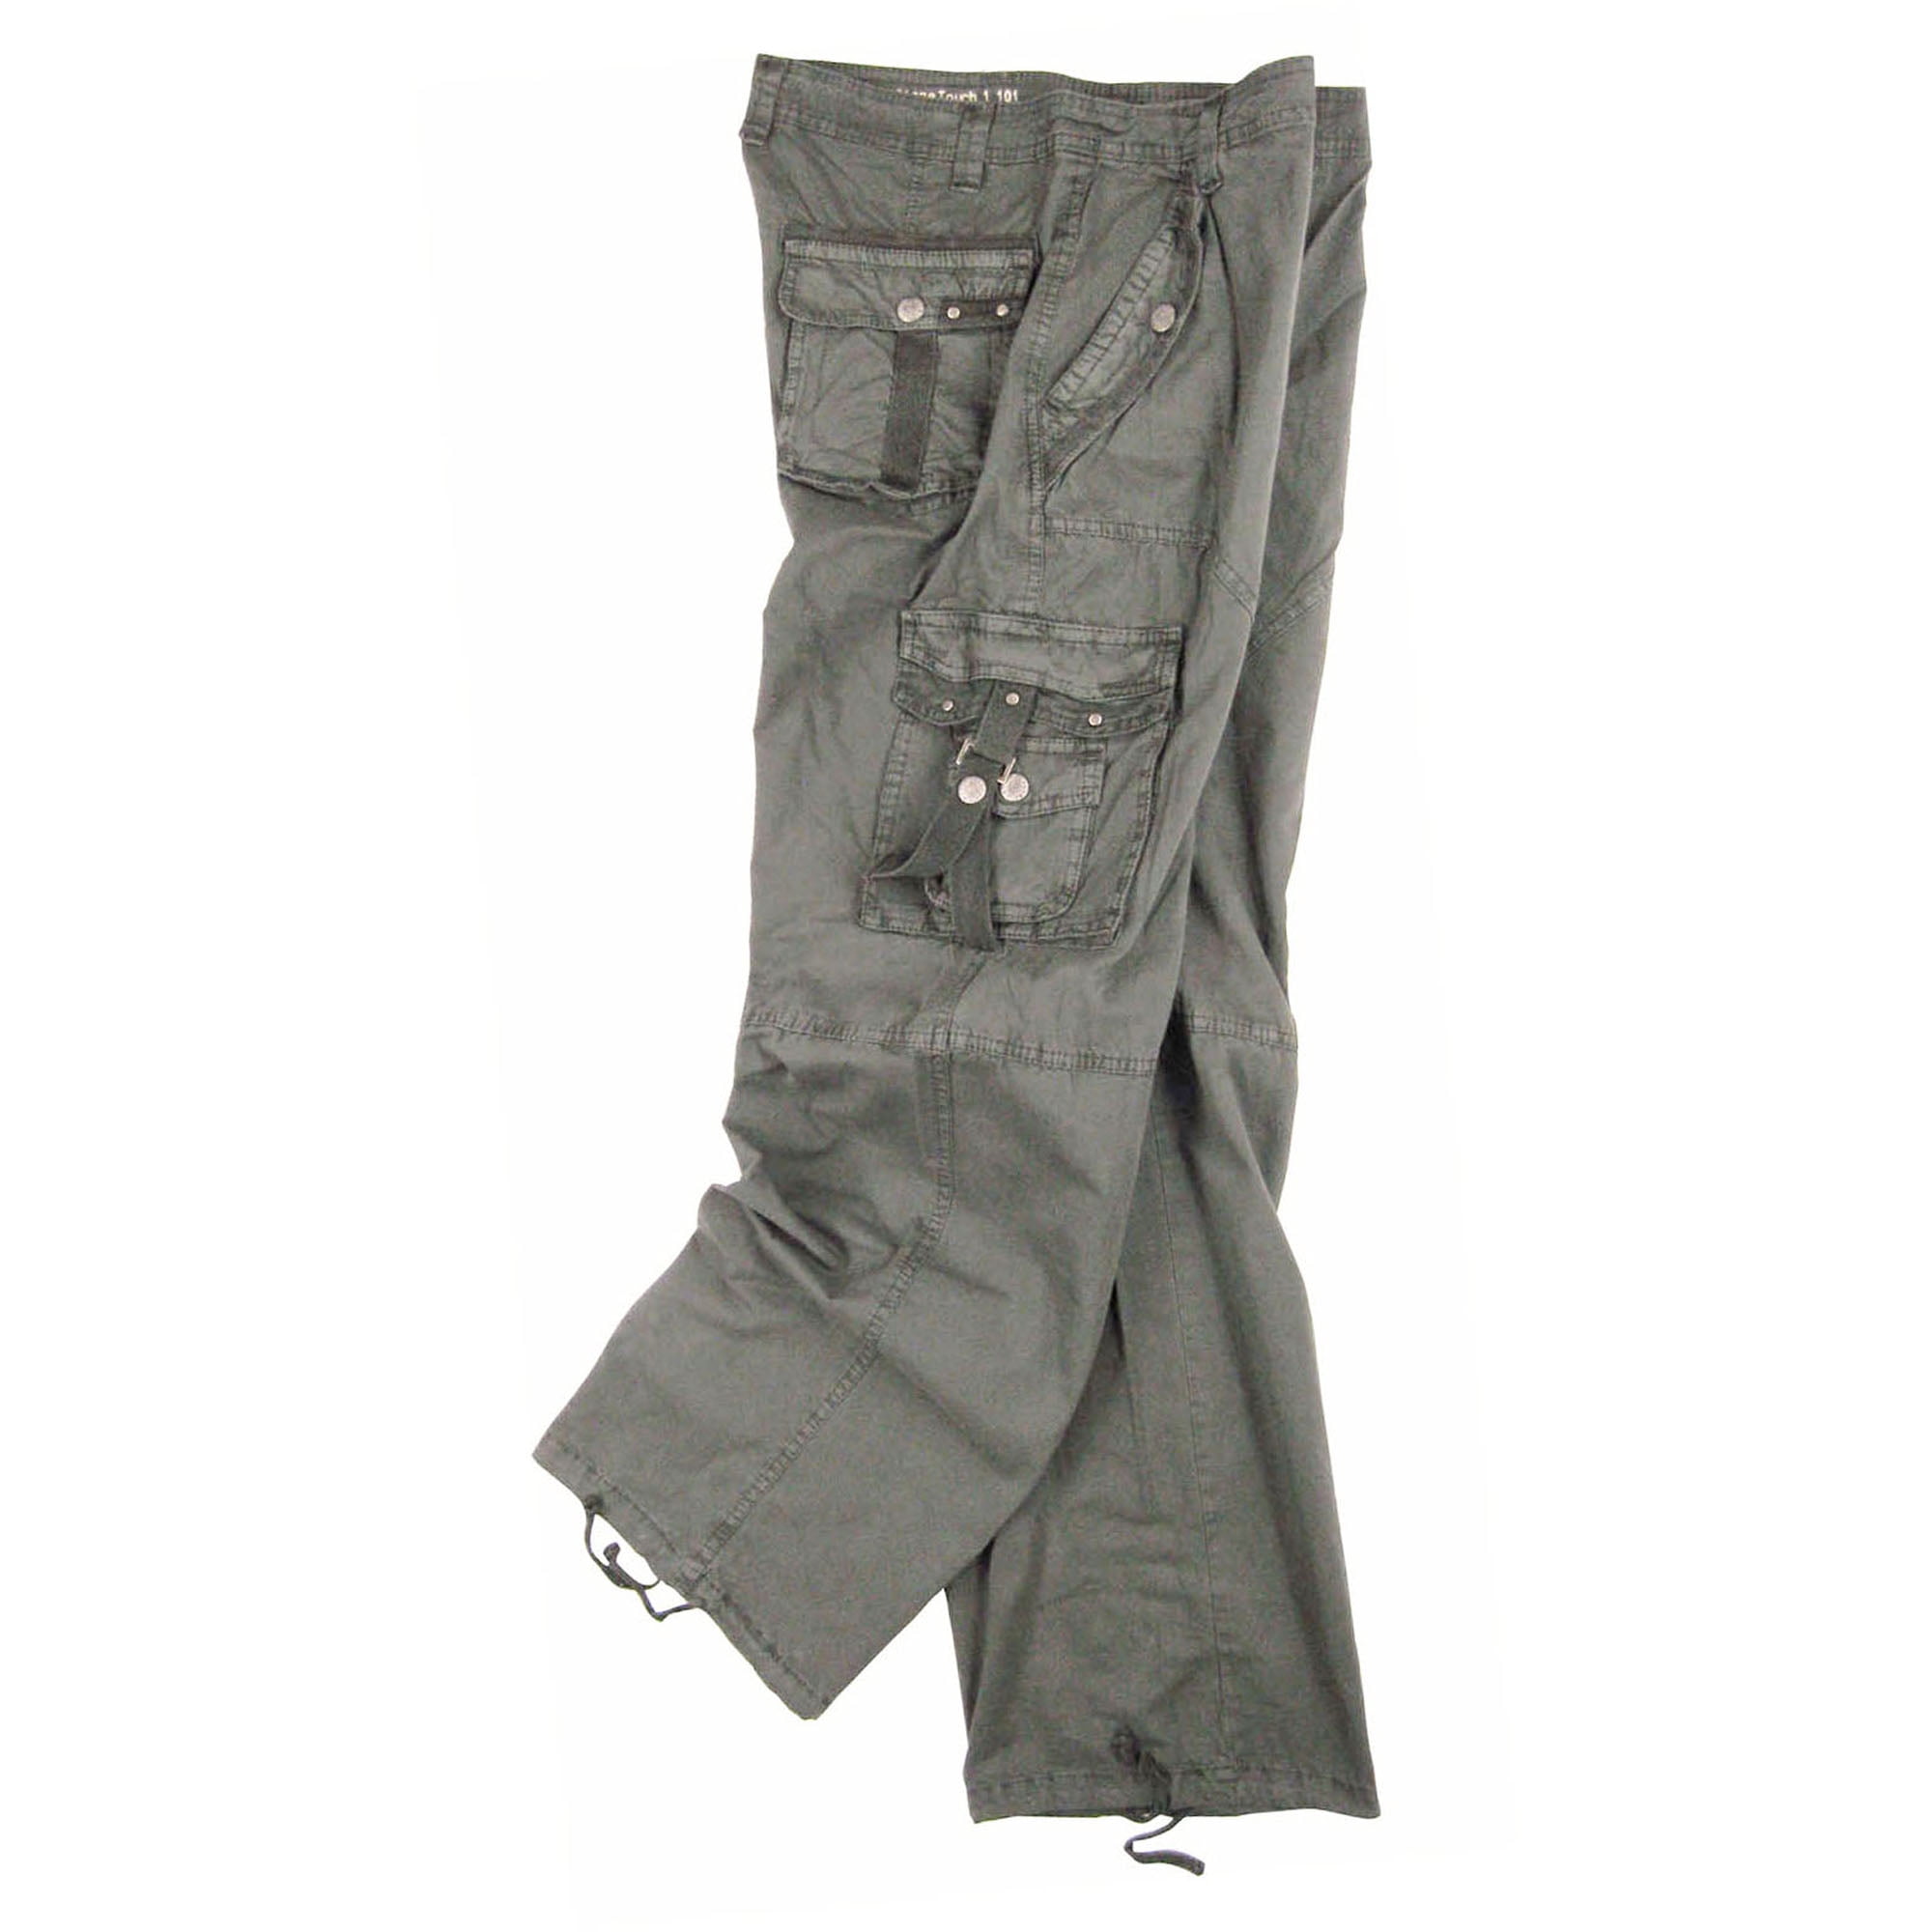 Mens Lightweight Military-Style Cargo Pants Sizes 32 to 46 #A8 